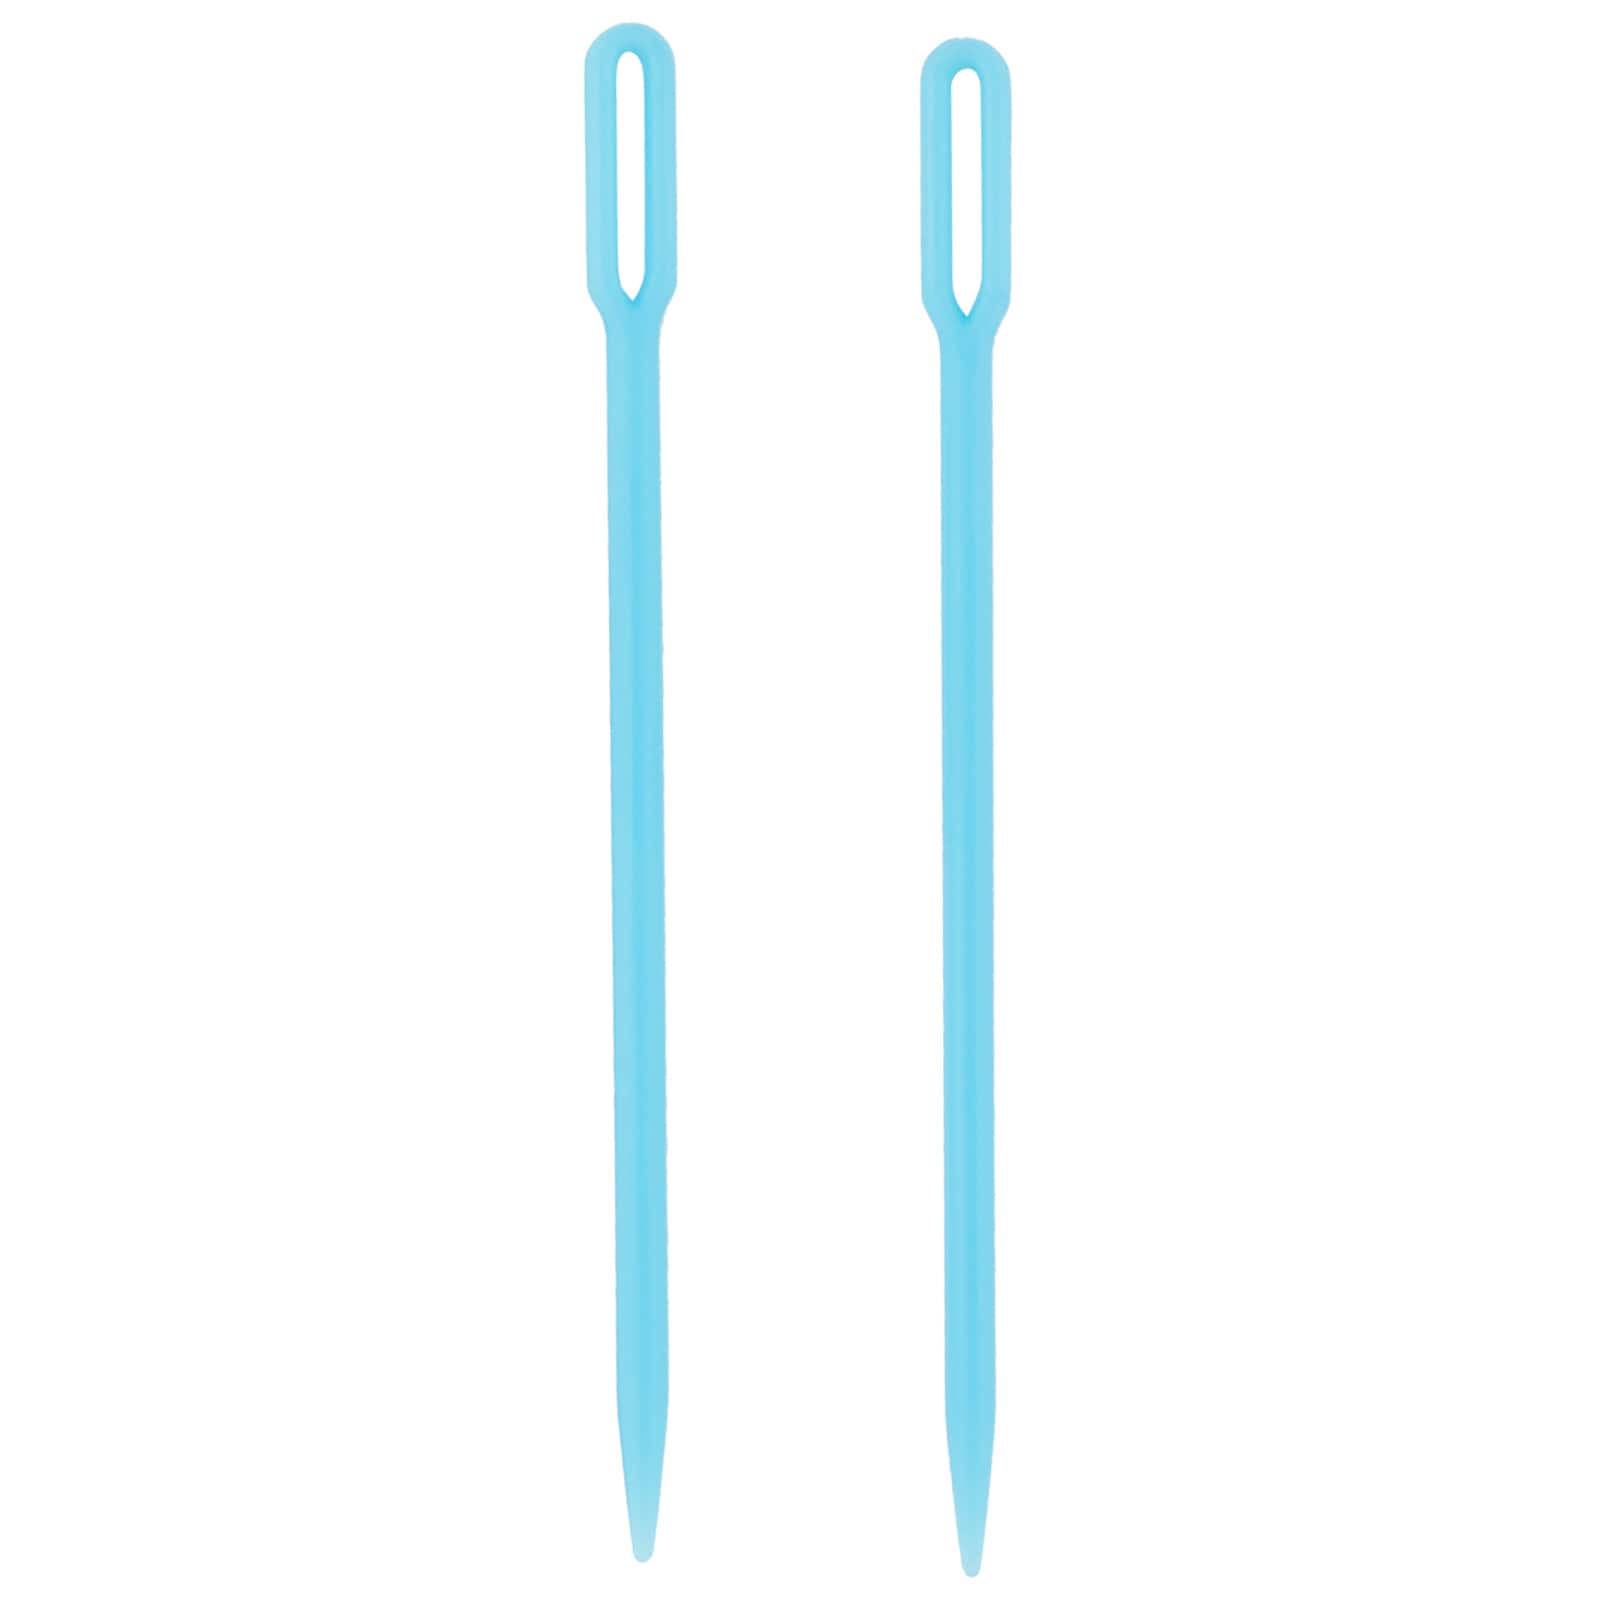 14 Anodized Aluminum Knitting Needles by Loops & Threads®